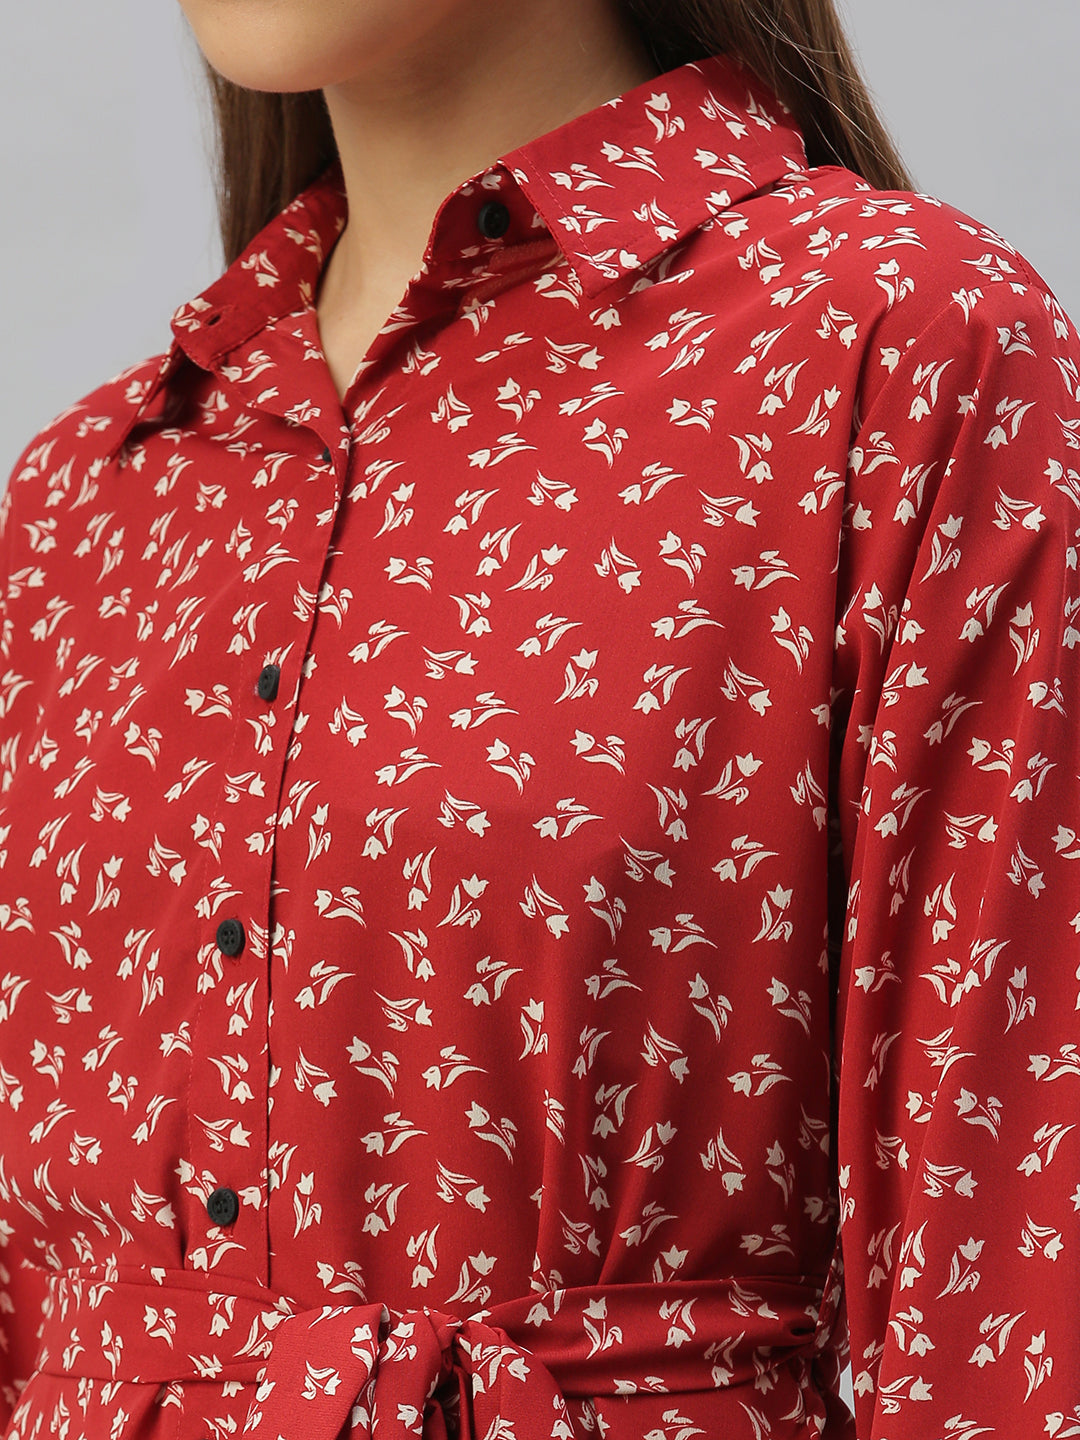 Women Slim Fit Red Floral Shirt